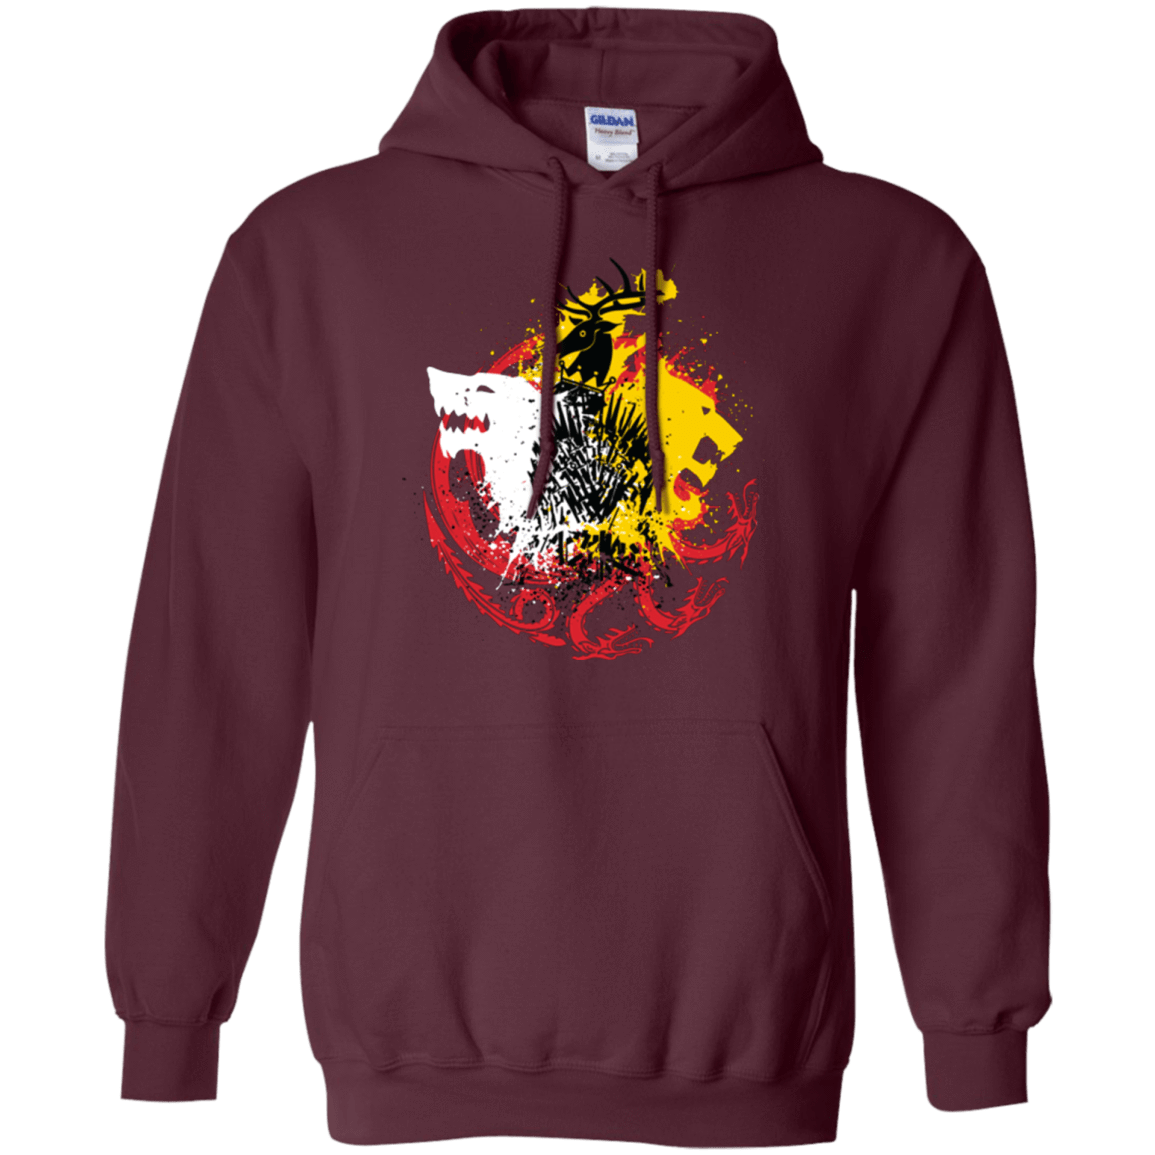 Sweatshirts Maroon / Small GAME OF COLORS Pullover Hoodie